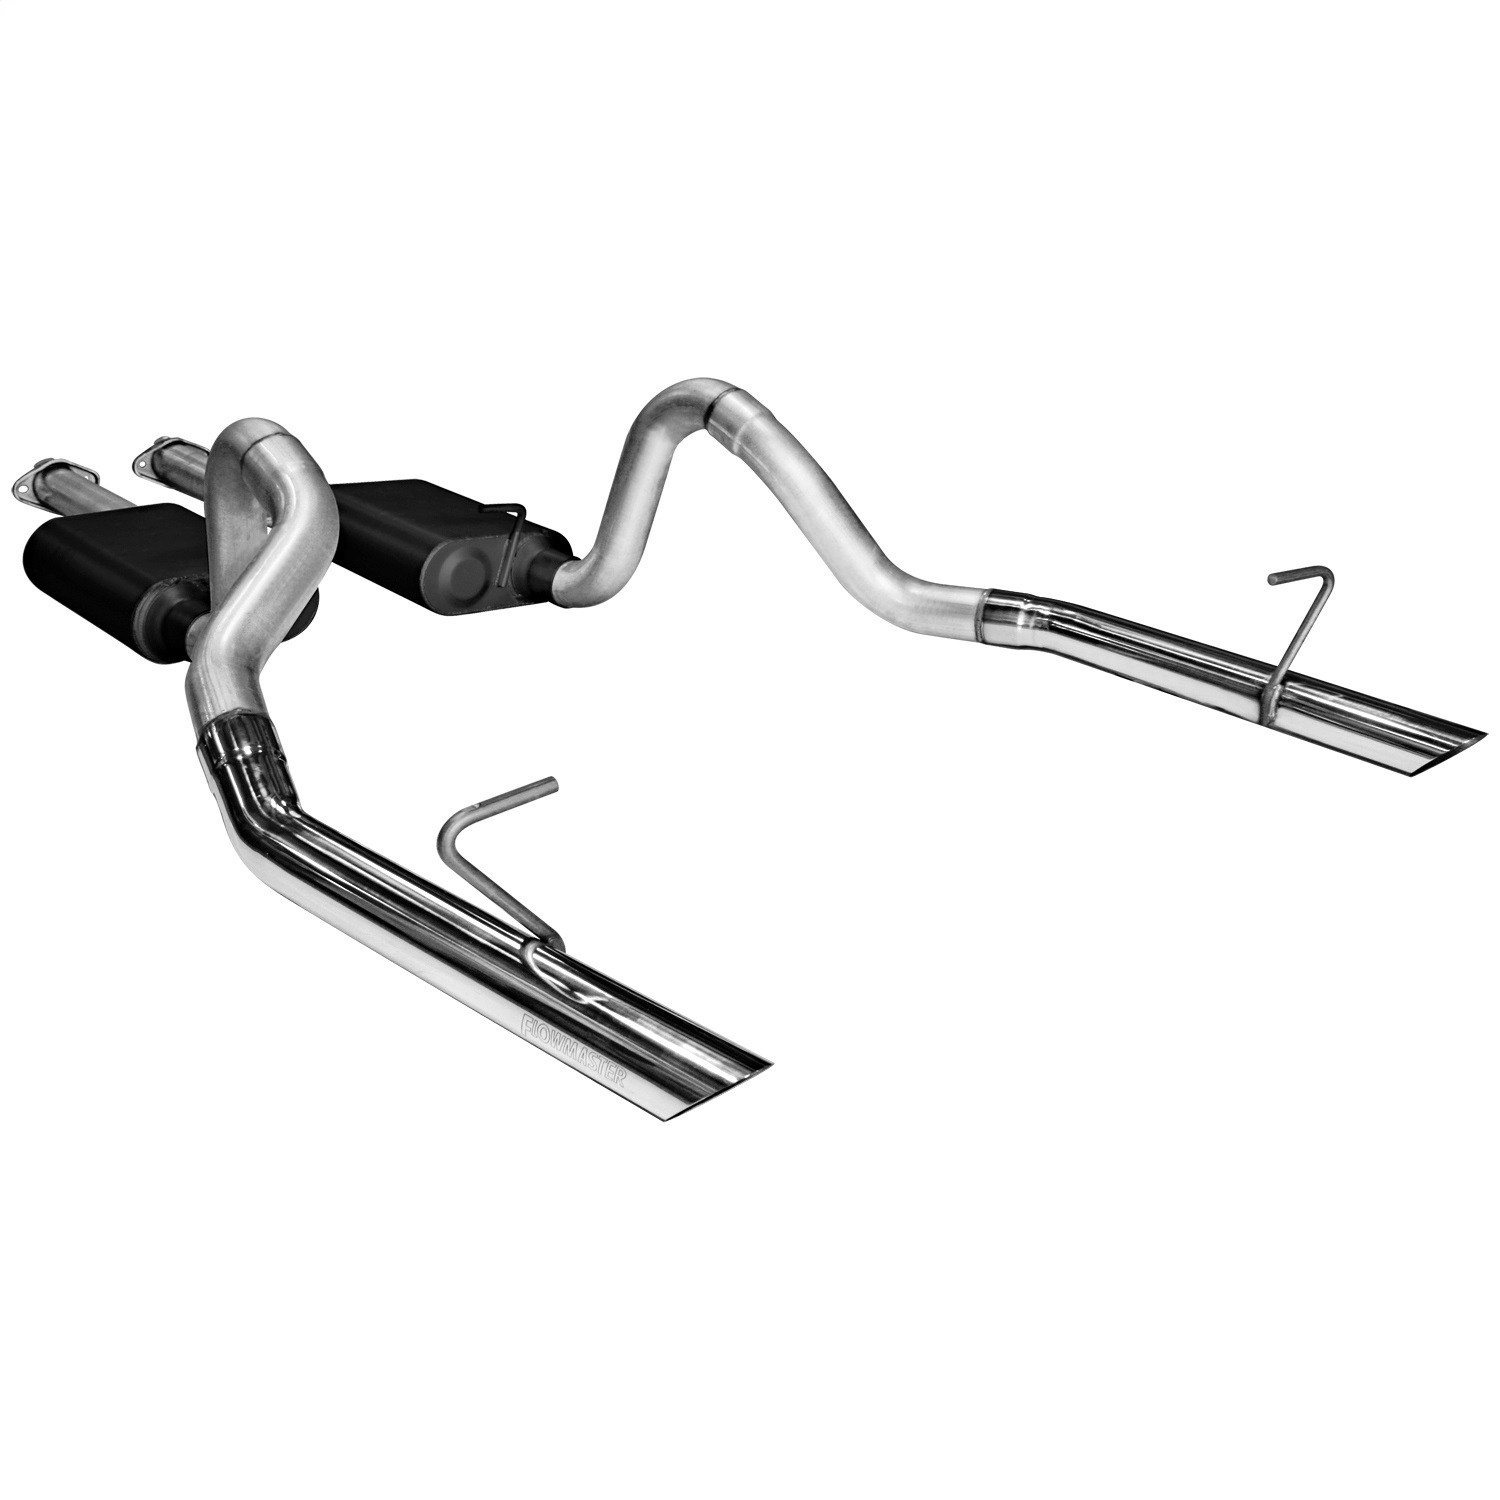 Flowmaster Flowmaster 17213 American Thunder Cat Back Exhaust System Fits 86-93 Mustang